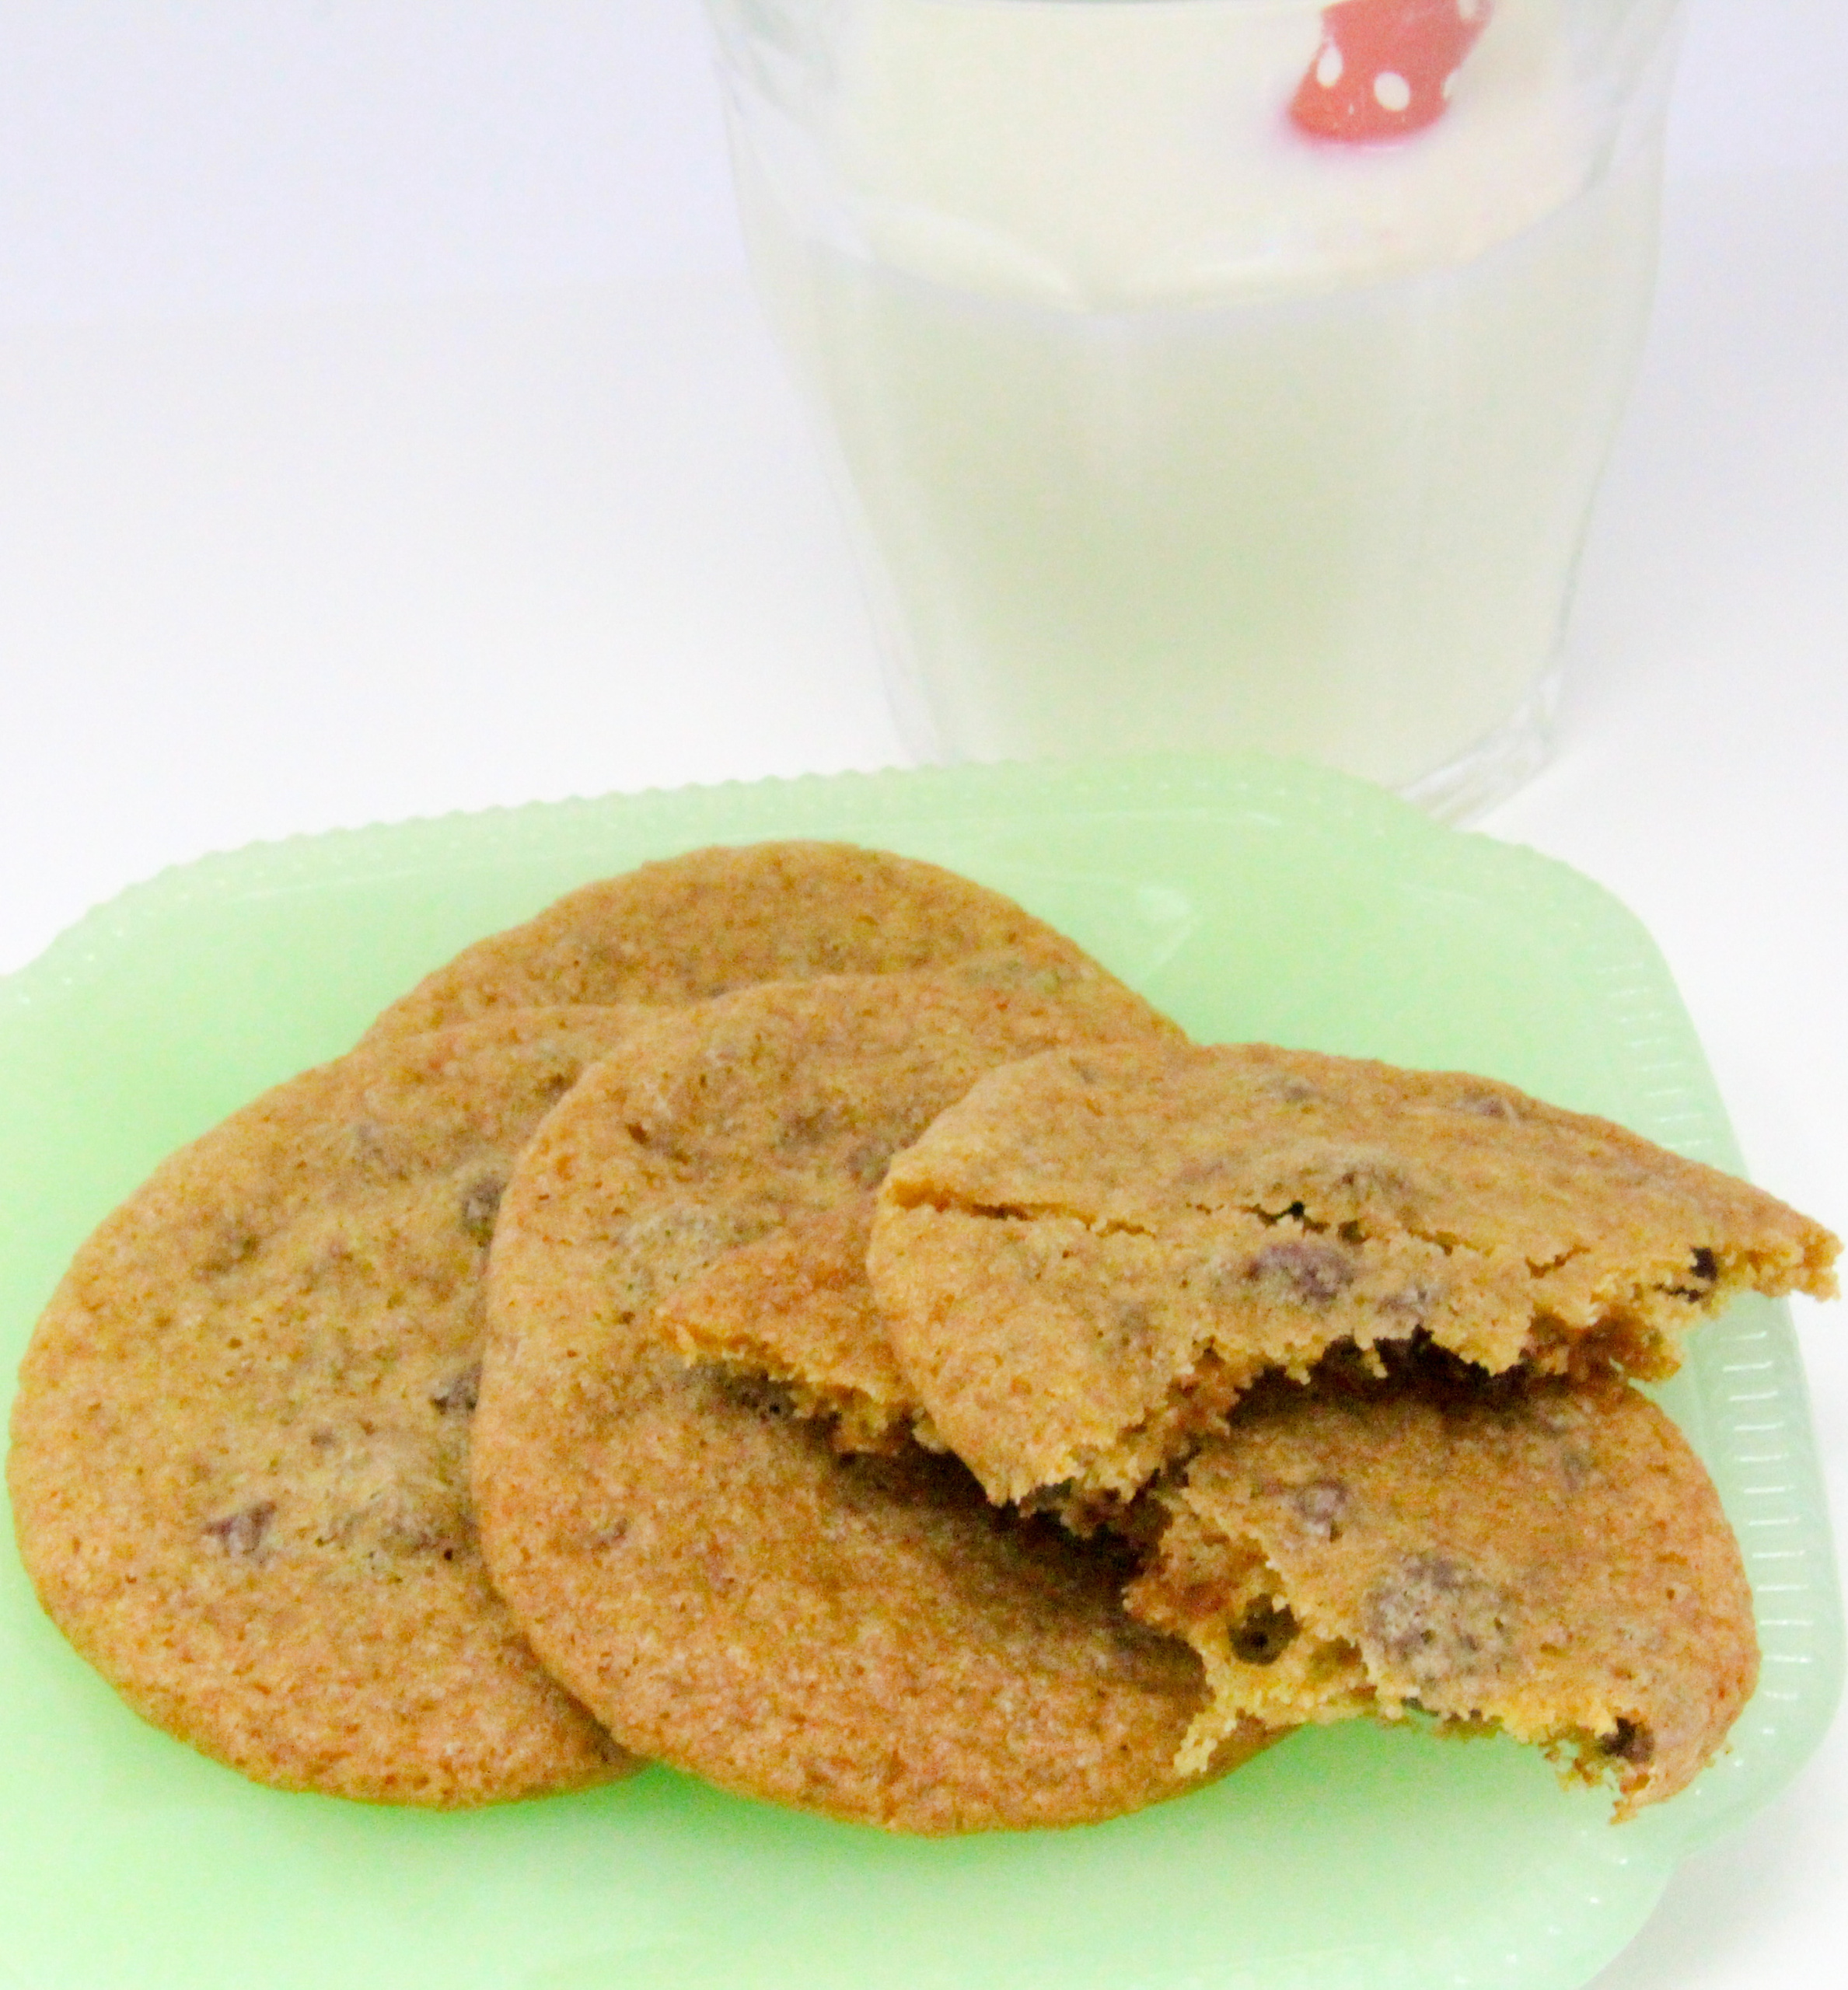 Sam’s Thin and Chewy Chocolate Chip Cookies relies on high-fat butter, such as a French or Irish brand, for the perfect chewy cookie. Dark brown sugar gives the cookie an added depth of flavor. Recipe shared with permission granted by Amy Pershing, author of A SIDE OF MURDER.